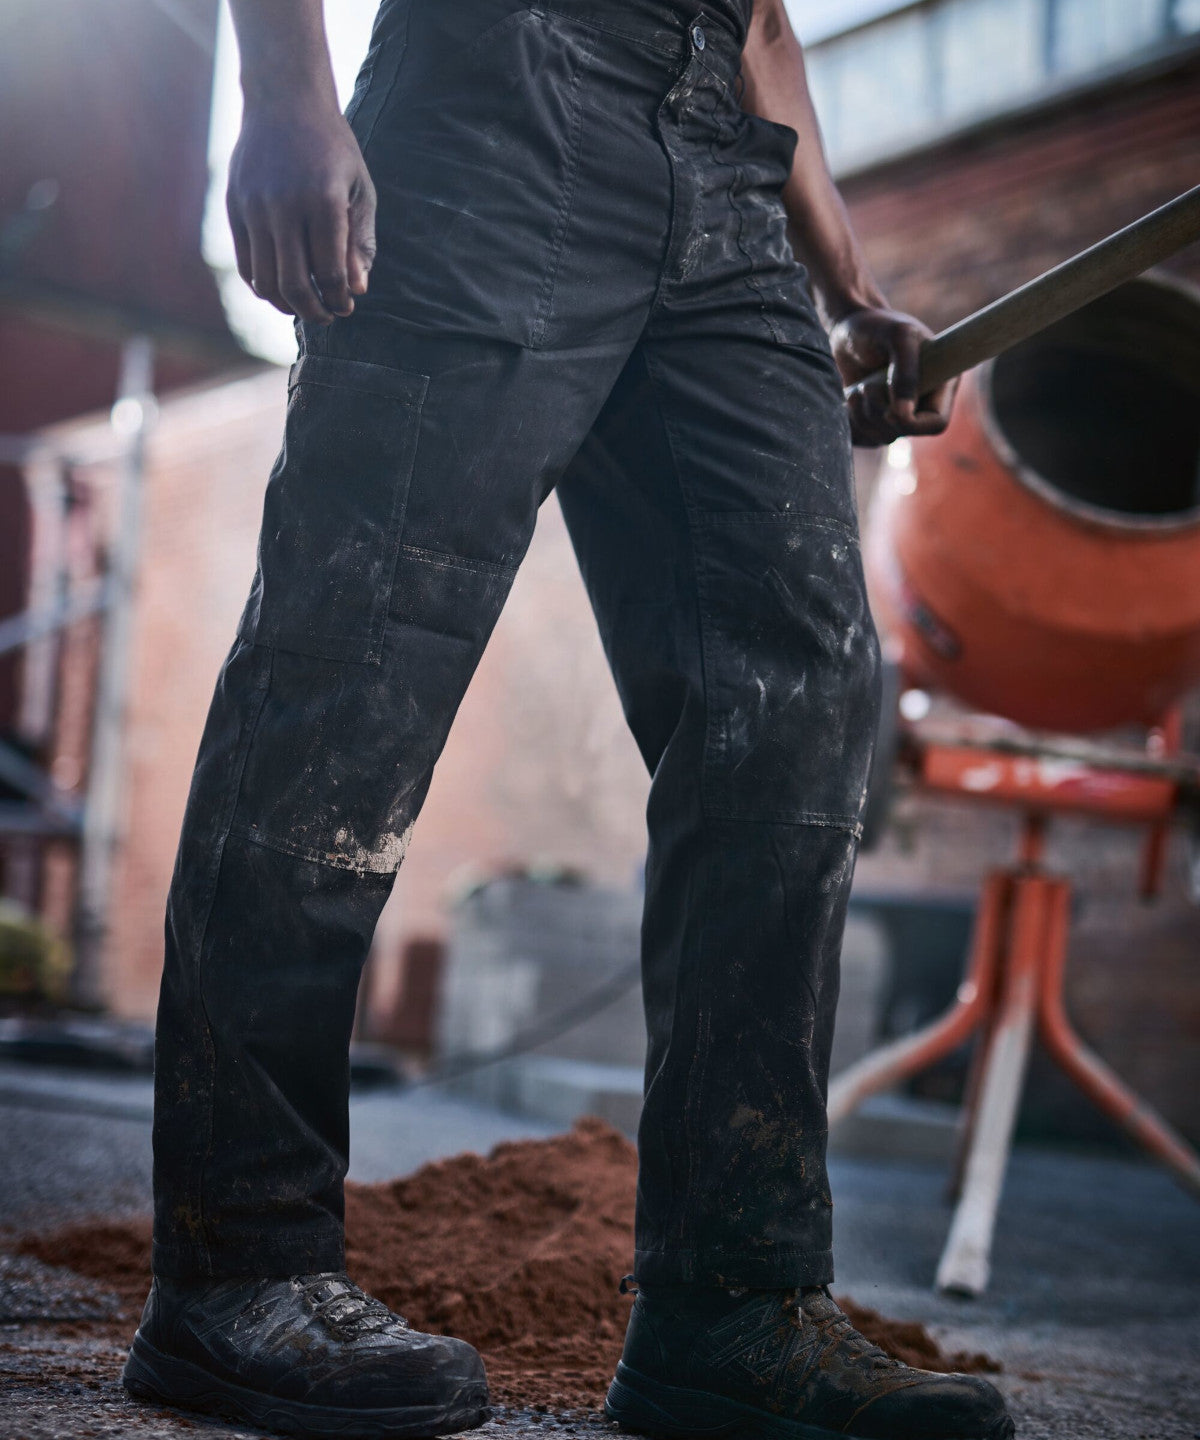 Portwest T602 PW3 Holster Work Trouser - All Clothing & Protection |  Uniforms, Workwear, Specialist Equipment & PPE Suppliers